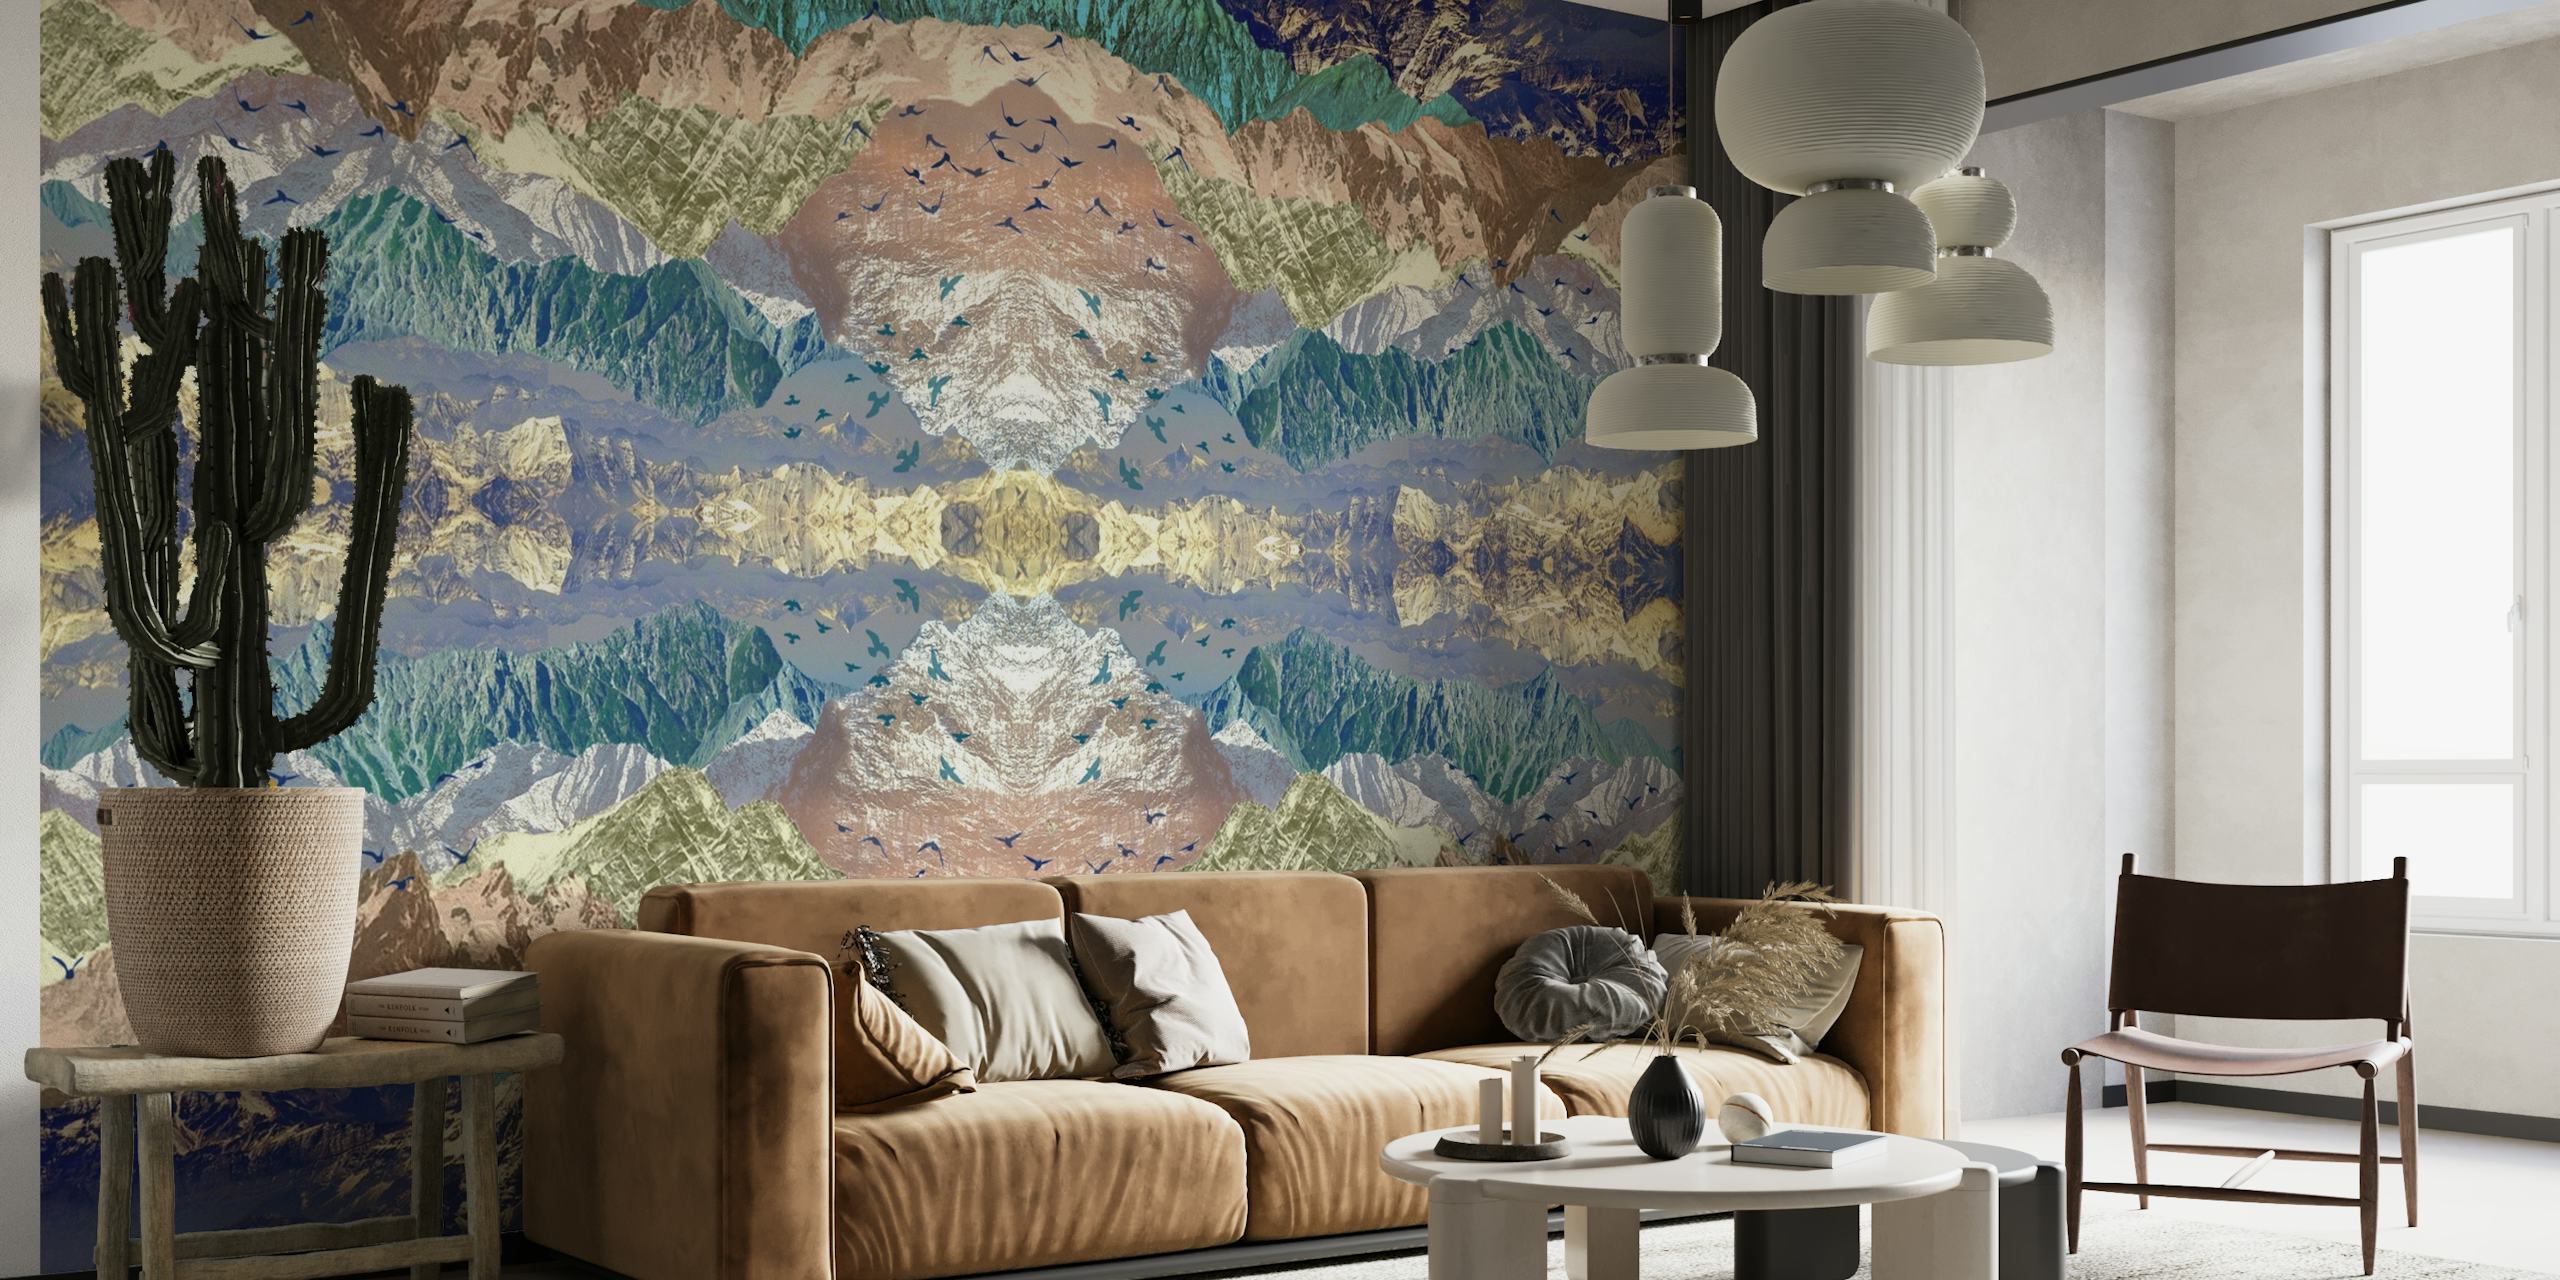 Utopia wall mural with symmetrical mountain and water reflection design